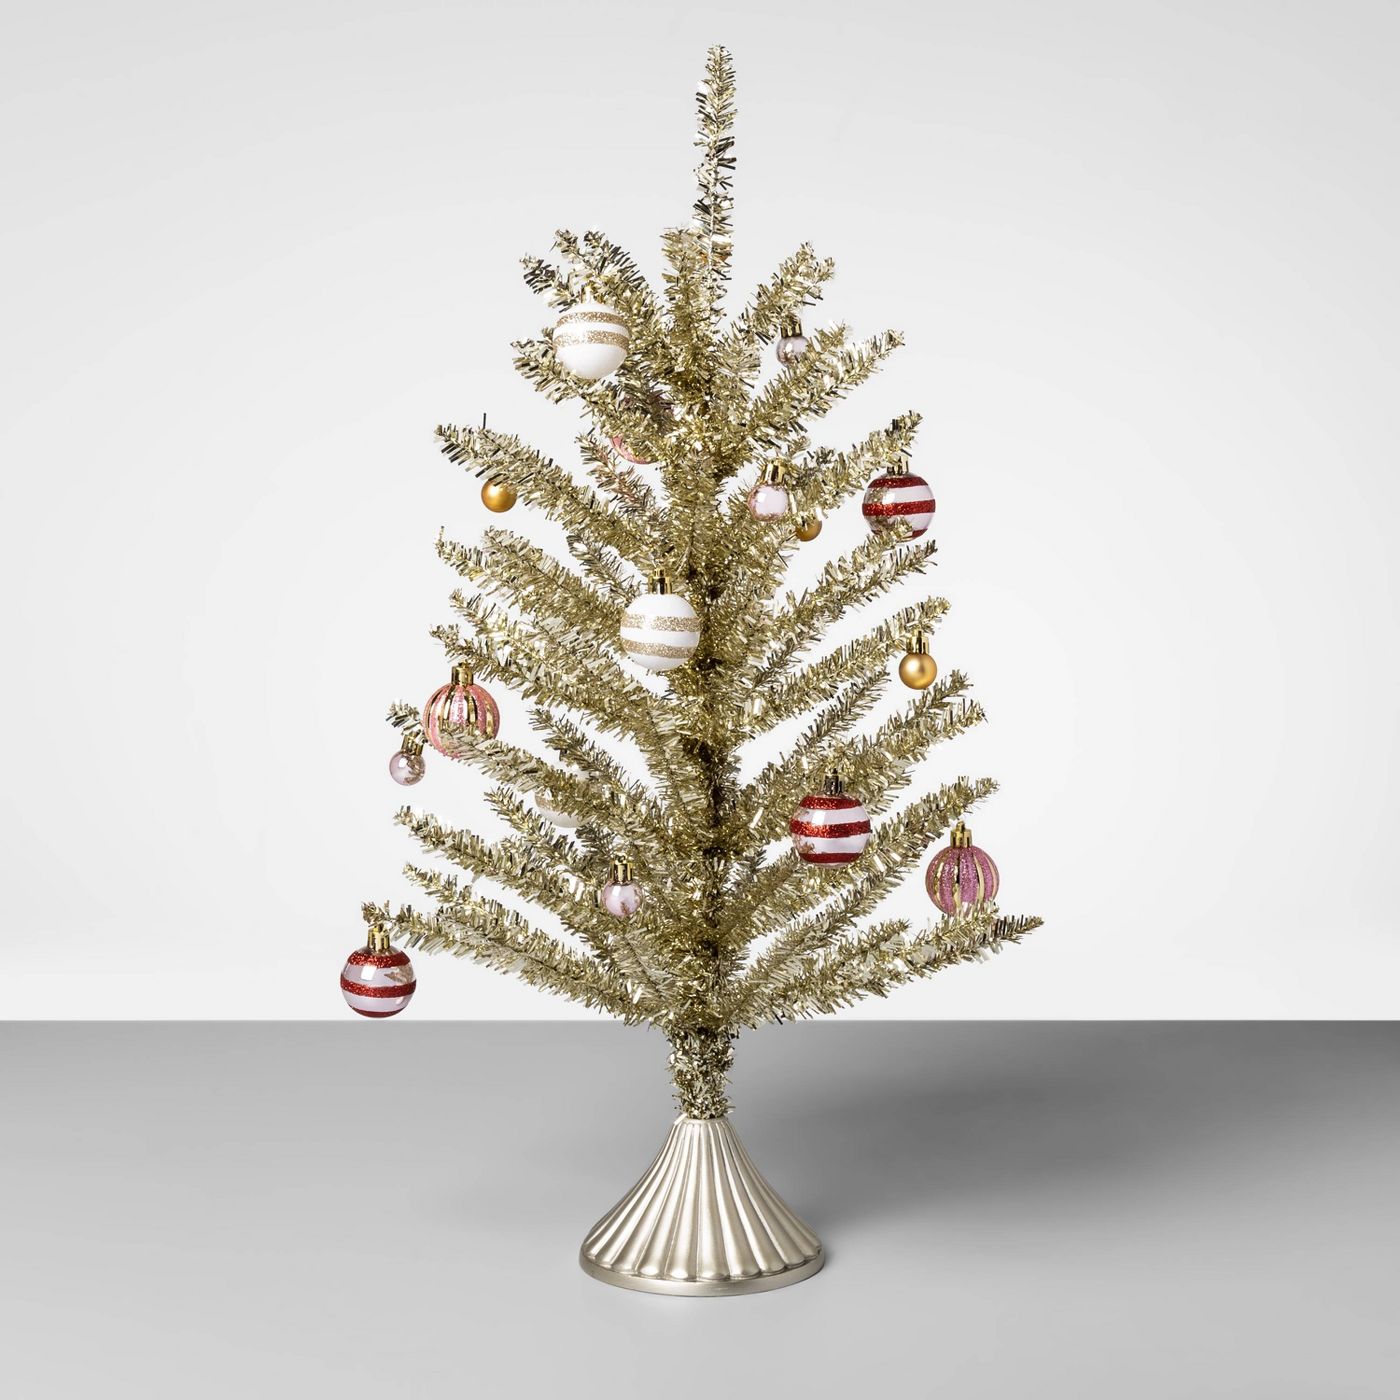 Decorated-tinsel-tree-from-Target